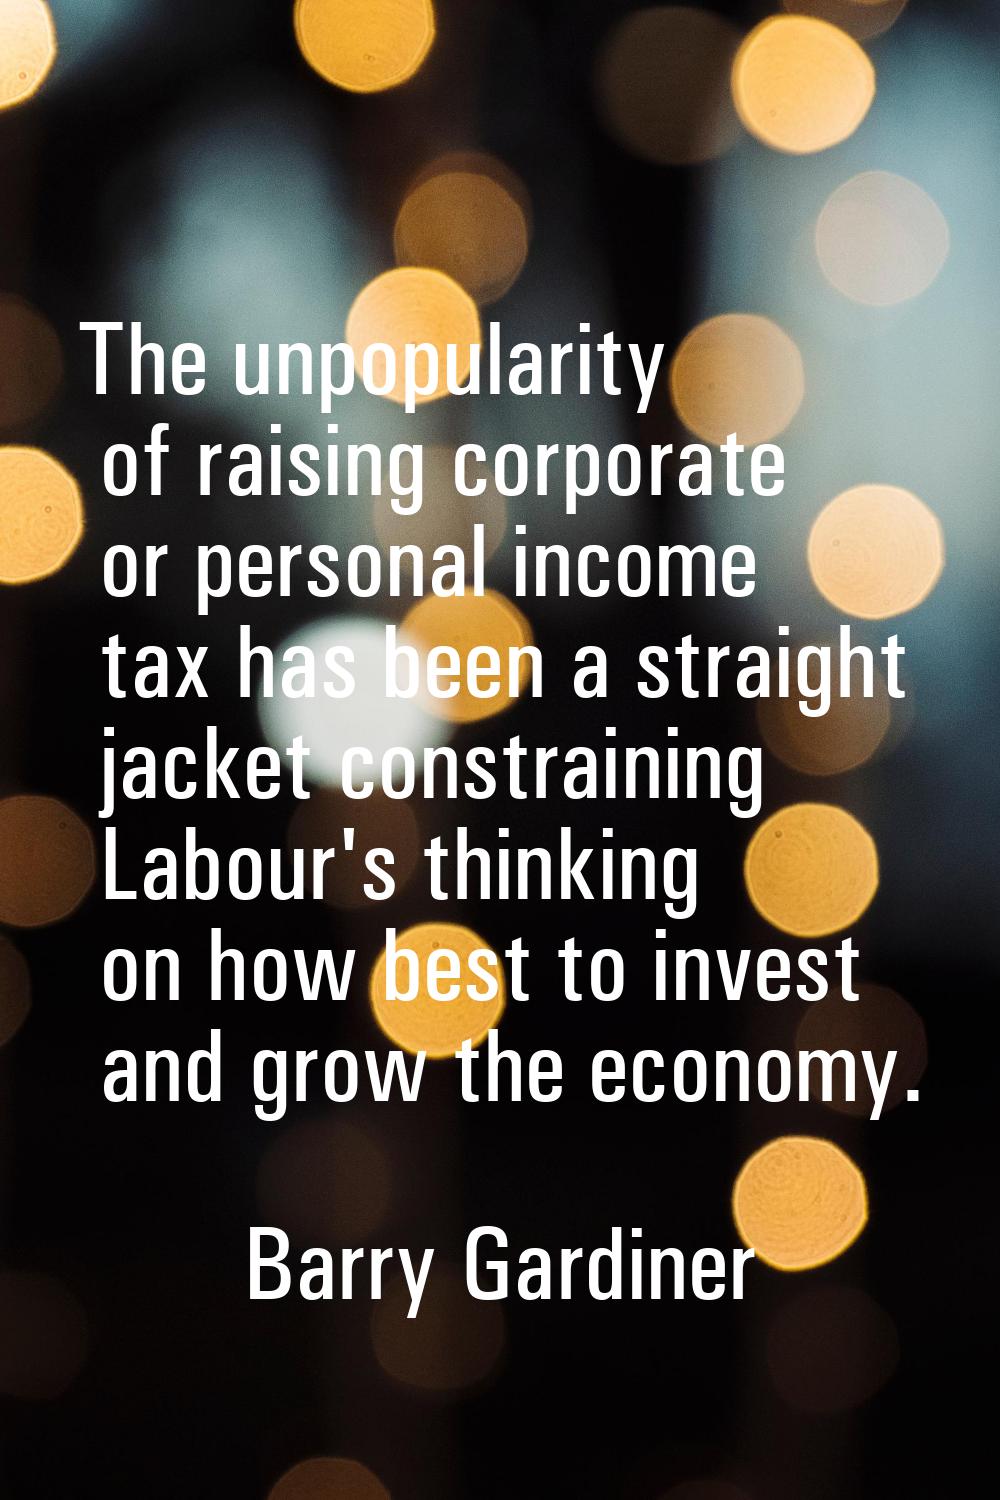 The unpopularity of raising corporate or personal income tax has been a straight jacket constrainin